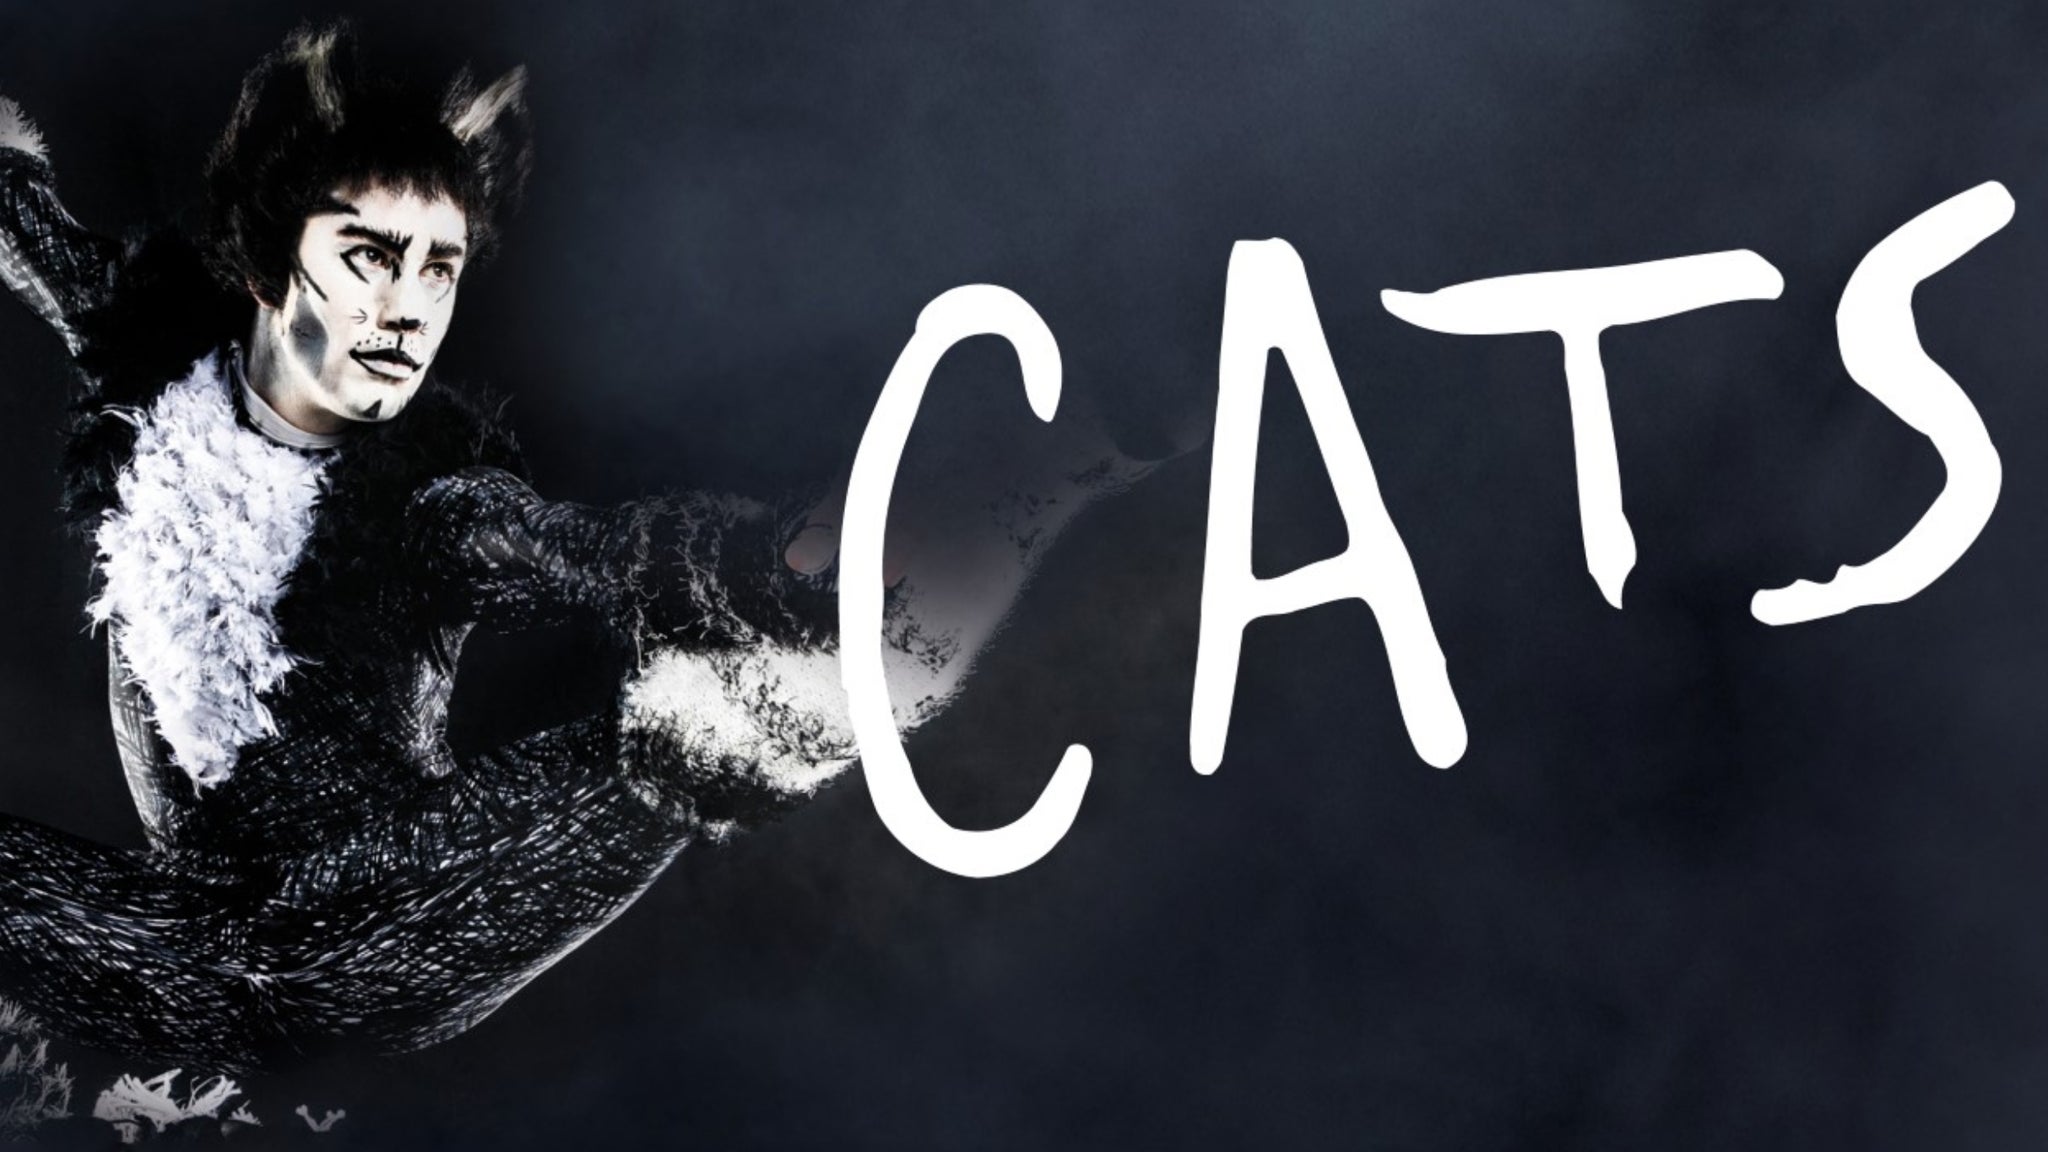 Cats in Washington promo photo for NTF presale offer code